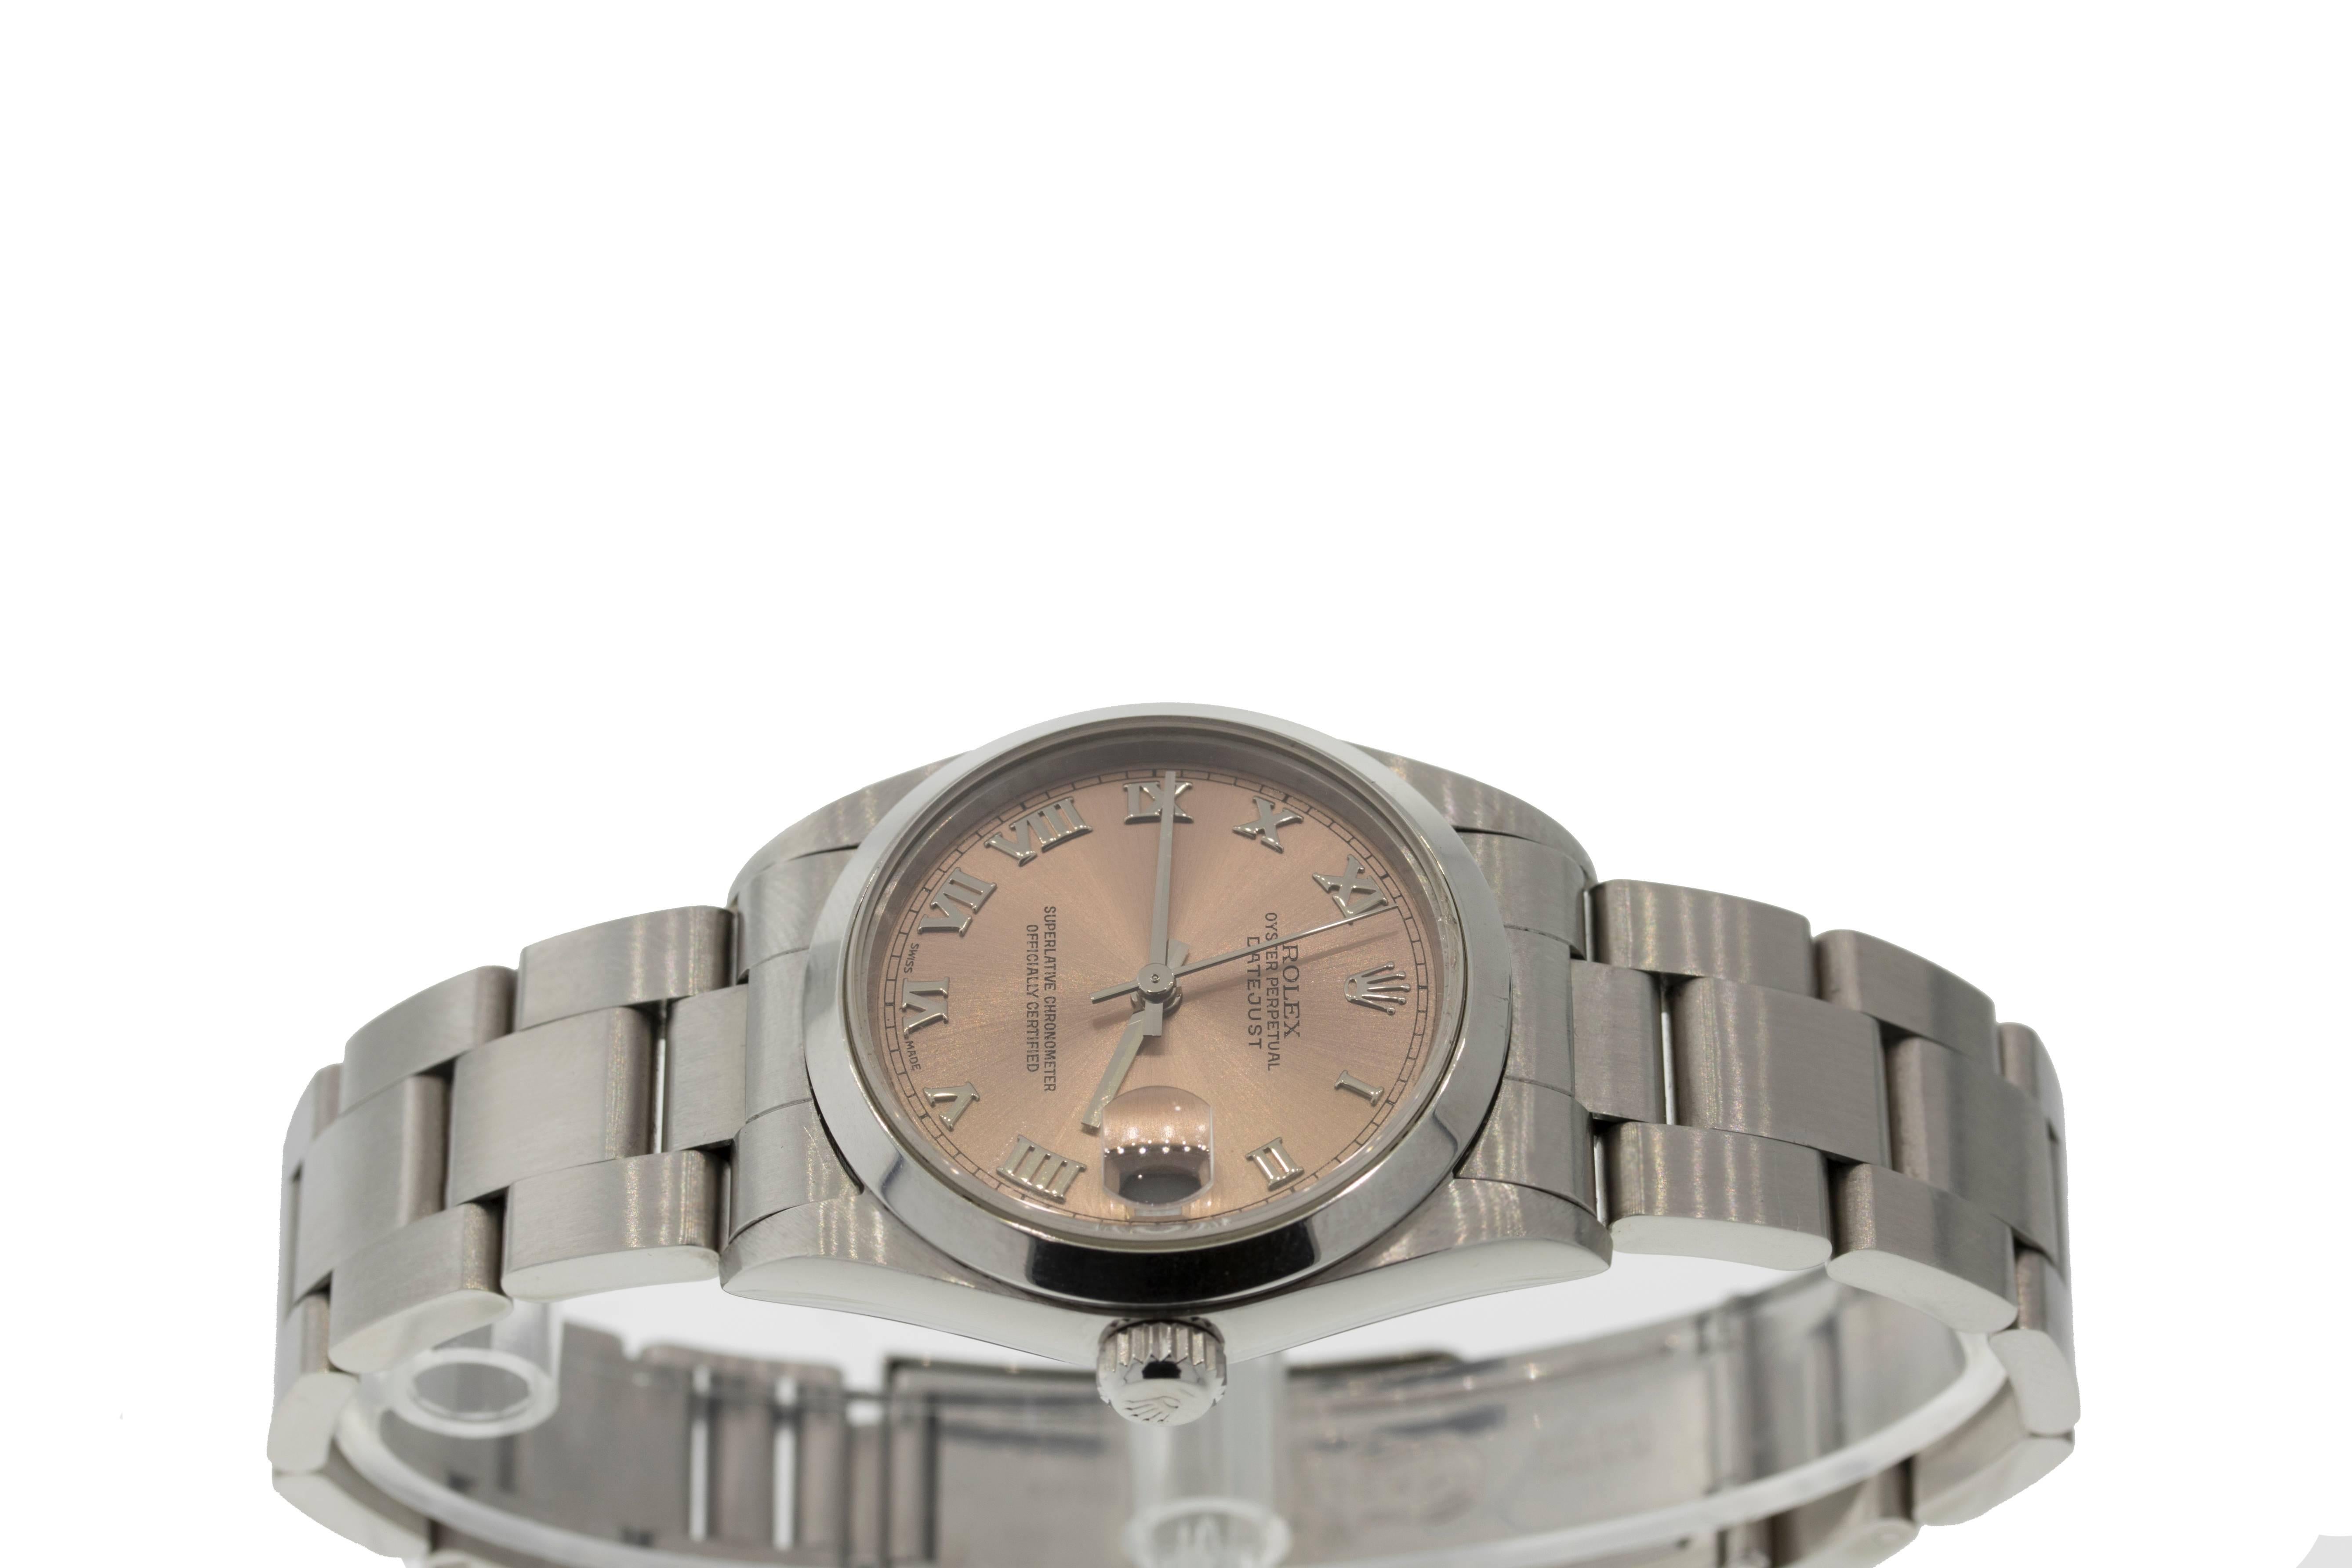 Brand Name: Rolex
Style Number: 31732
Style Name: Datejust
Color Name (Dial): Salmon with Silver Roman Hour Markers
Country of Manufacture: Switzerland
Gender: Unisex
Strap Material: Stainless Steel
Case Metal: Stainless Steel
Movement Type: